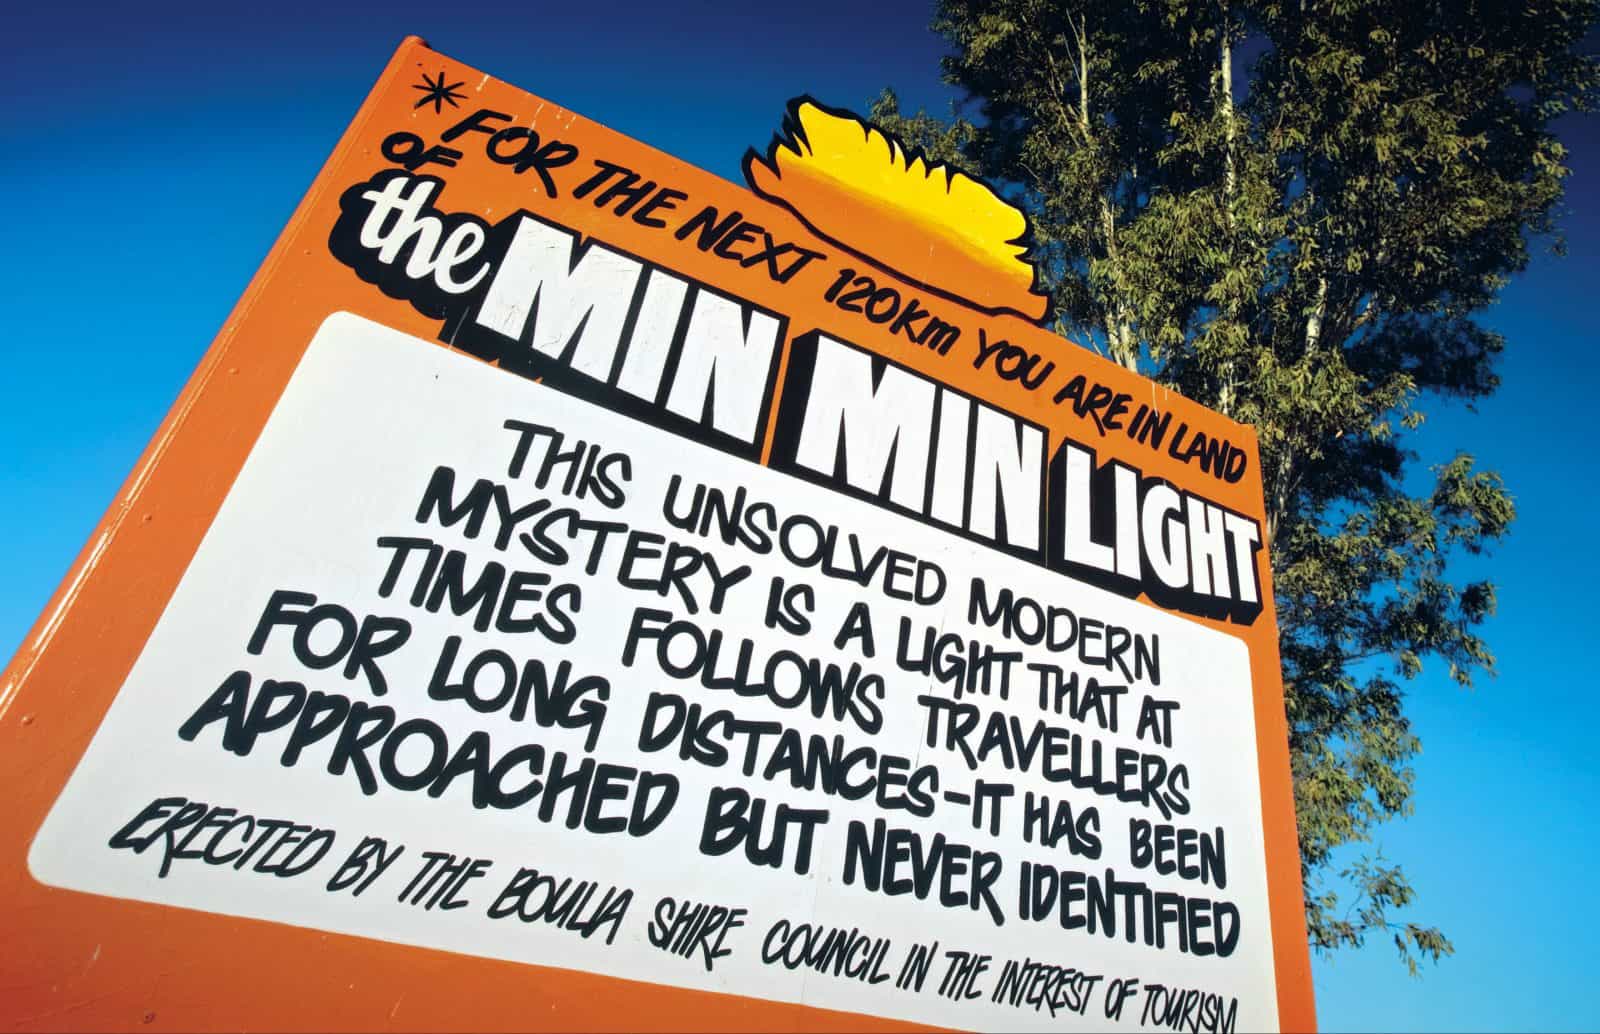 You are in the land of the Min Min Light